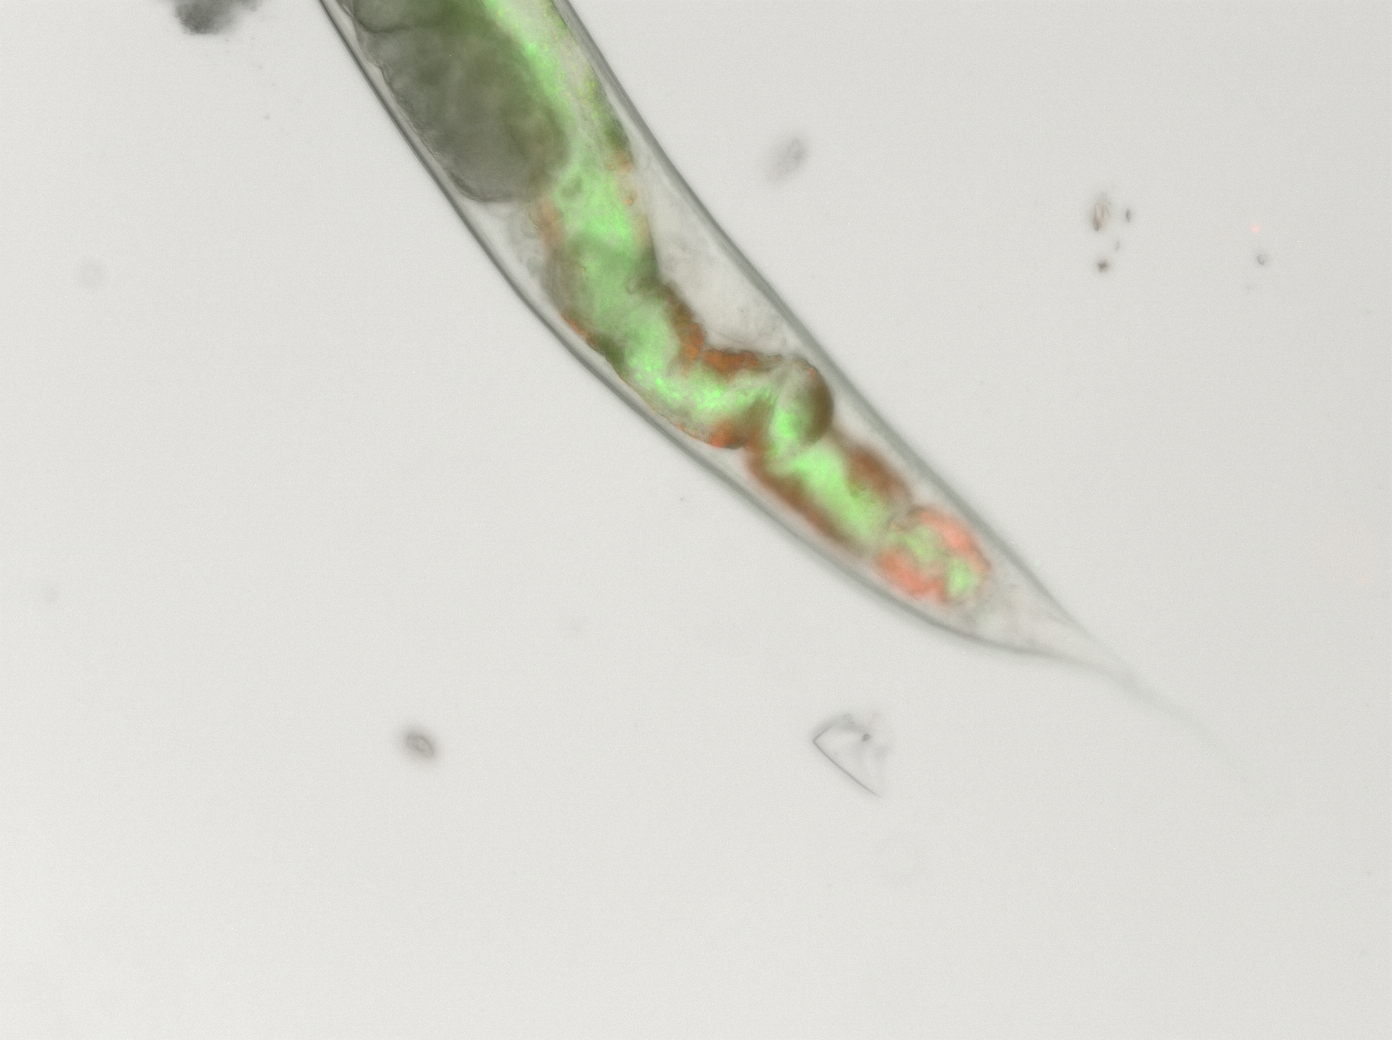 Fig. 2. Back of adult worm colonised with green-tagged S. enterica.